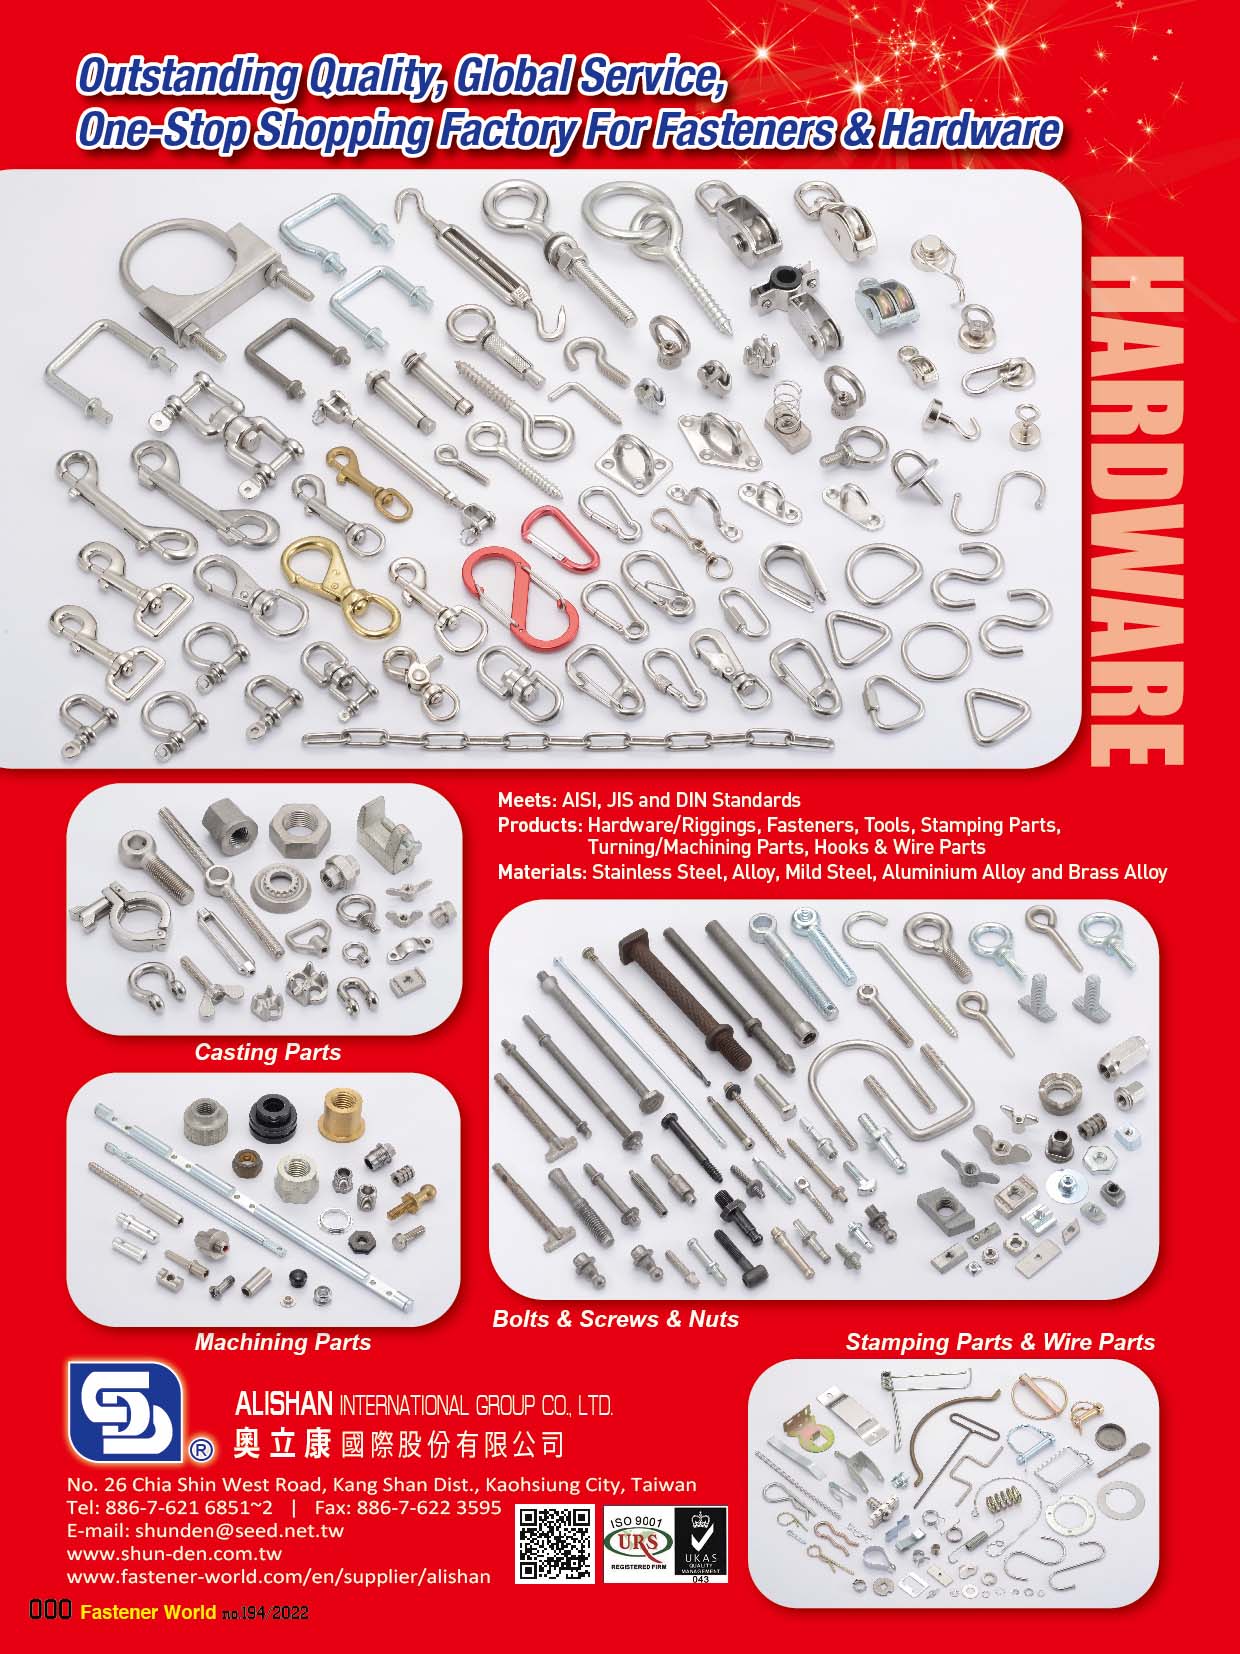 ALISHAN INTERNATIONAL GROUP CO., LTD. , Bolts & Screws, Nuts, Stamping Parts & Wire Parts, Eye Bolts, U Bolts, Clamps & Hooks, Hardware, Casting Parts & Machining Parts